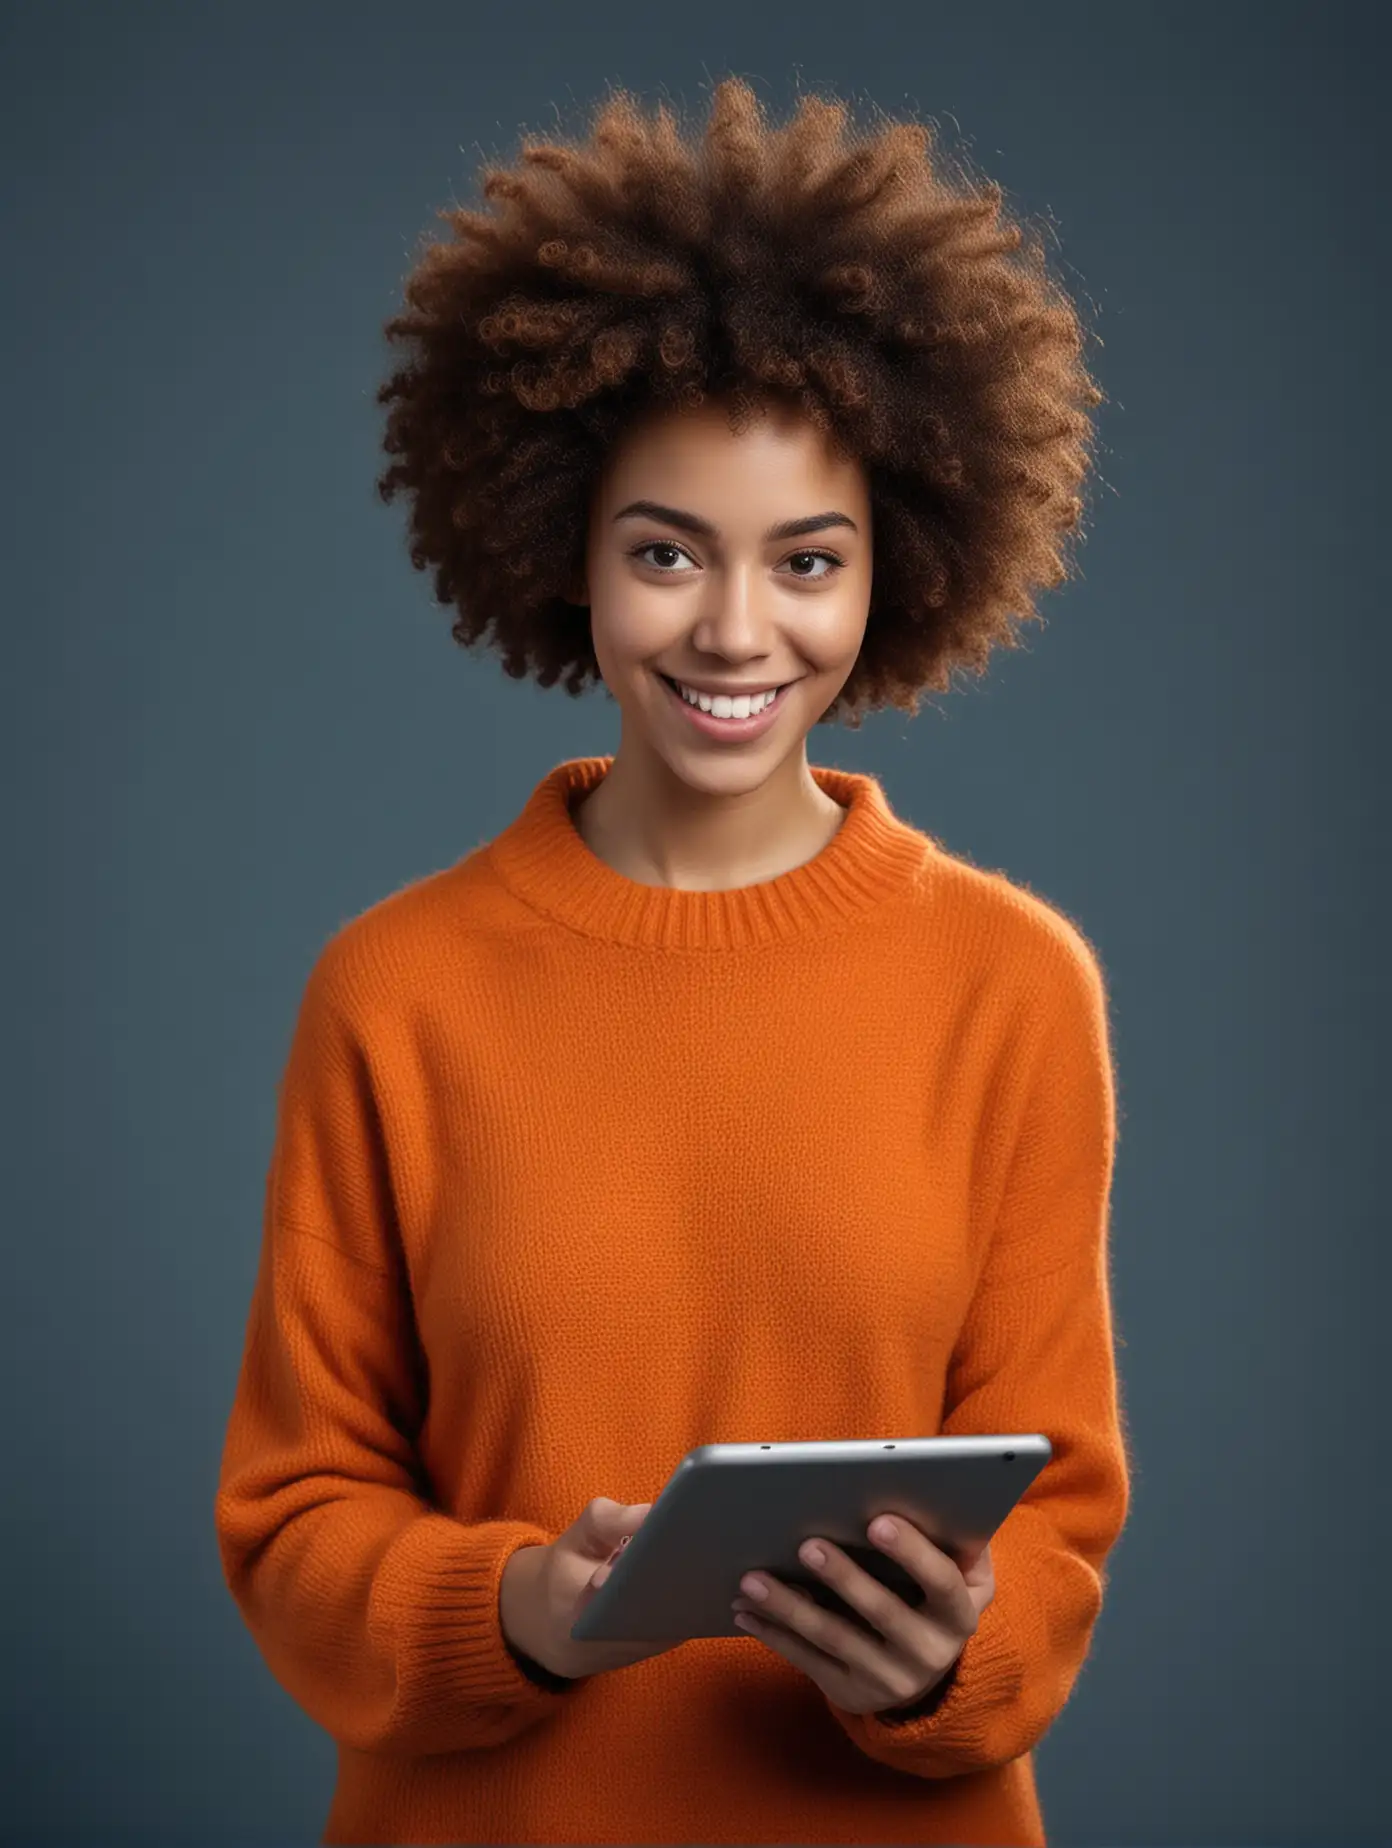 Smiling Young Woman with Afro Hairstyle Reading Tablet in Studio Portrait